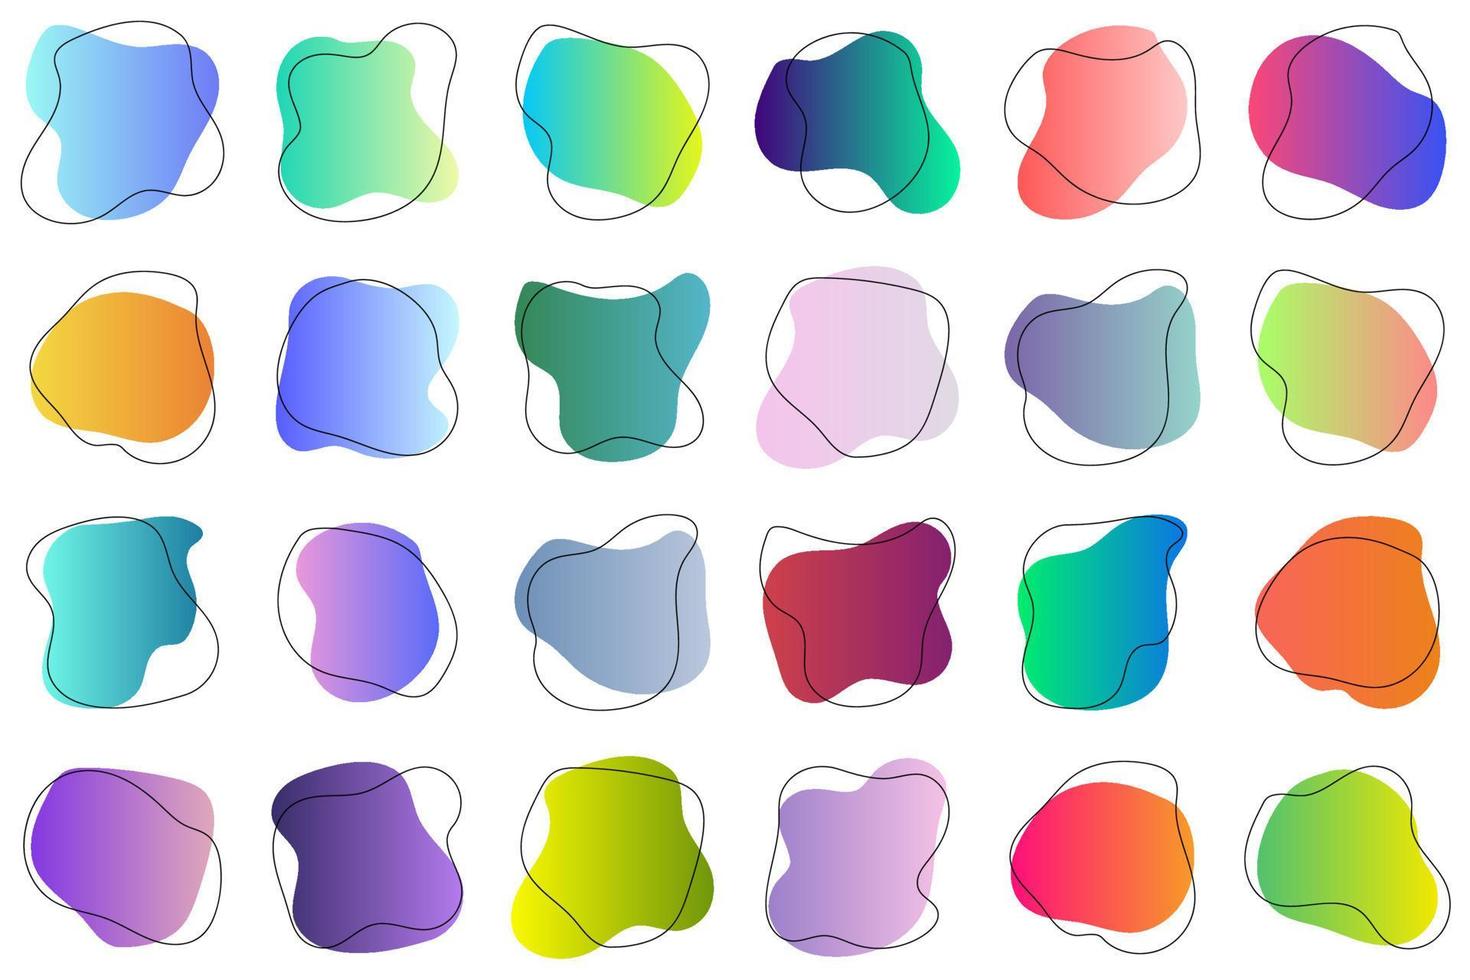 Set of abstract graphic design elements. Hand drawn colorful random blot collection. Simple rounded shapes with trendy gradients. Vector illustration